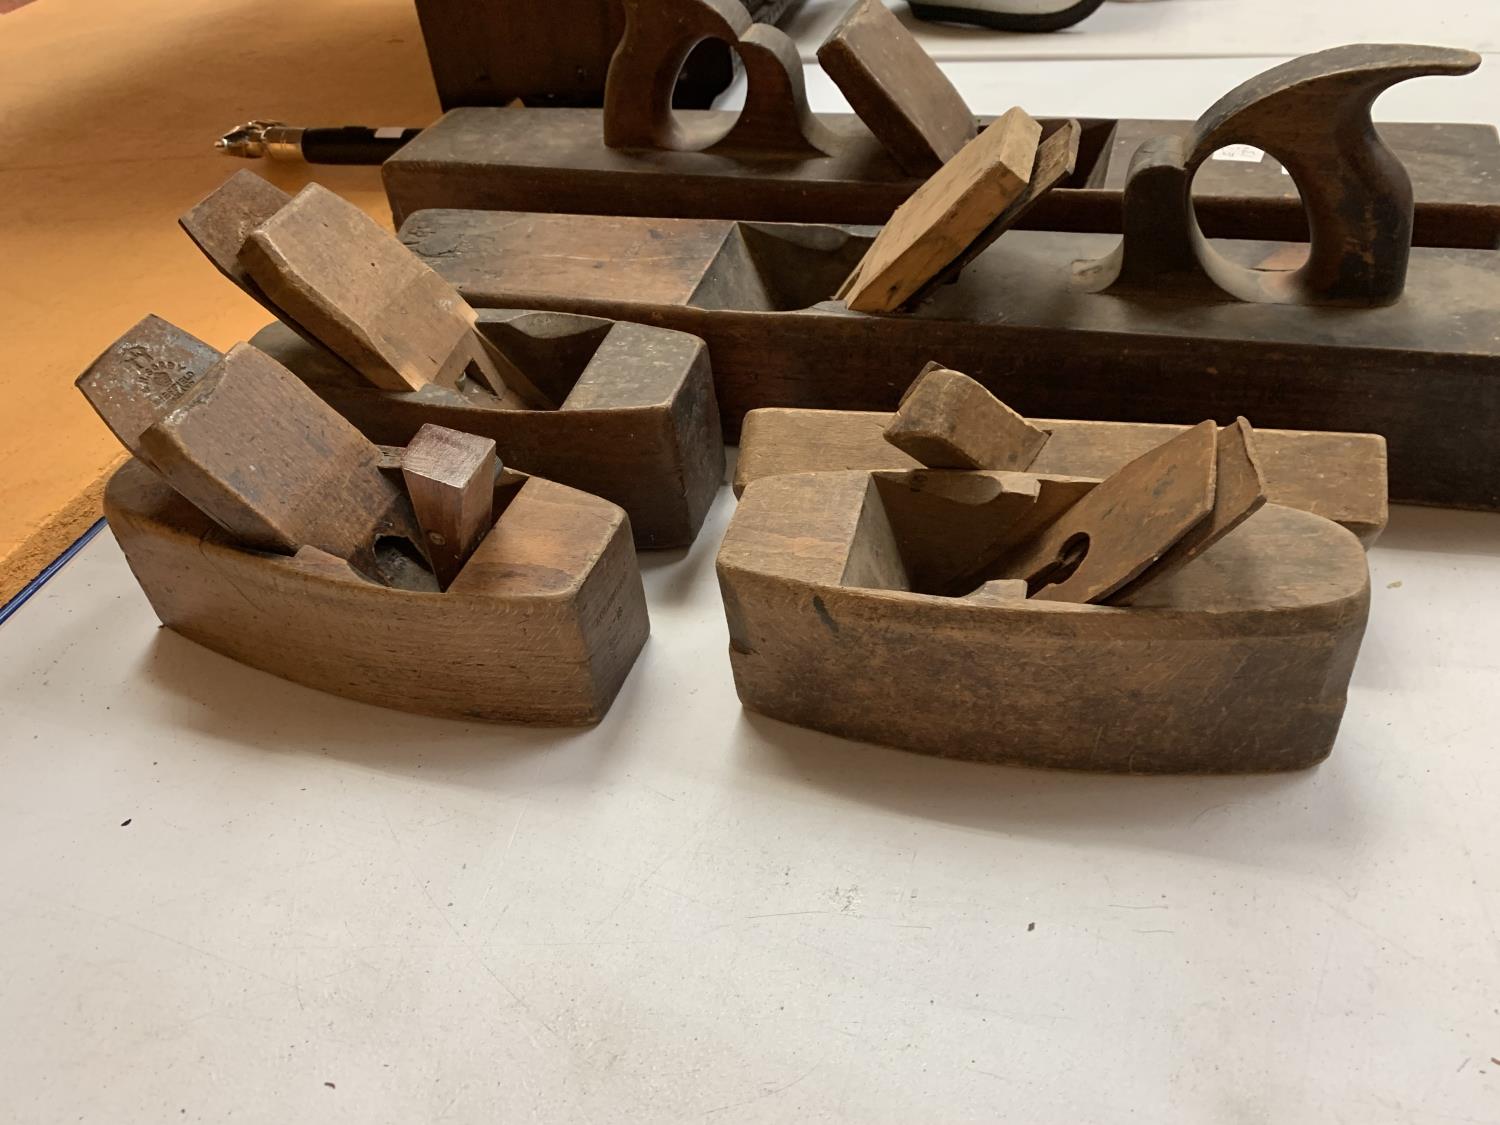 EIGHT VINTAGE WOODEN PLANES OF VARIOUS SIZES - Image 5 of 5